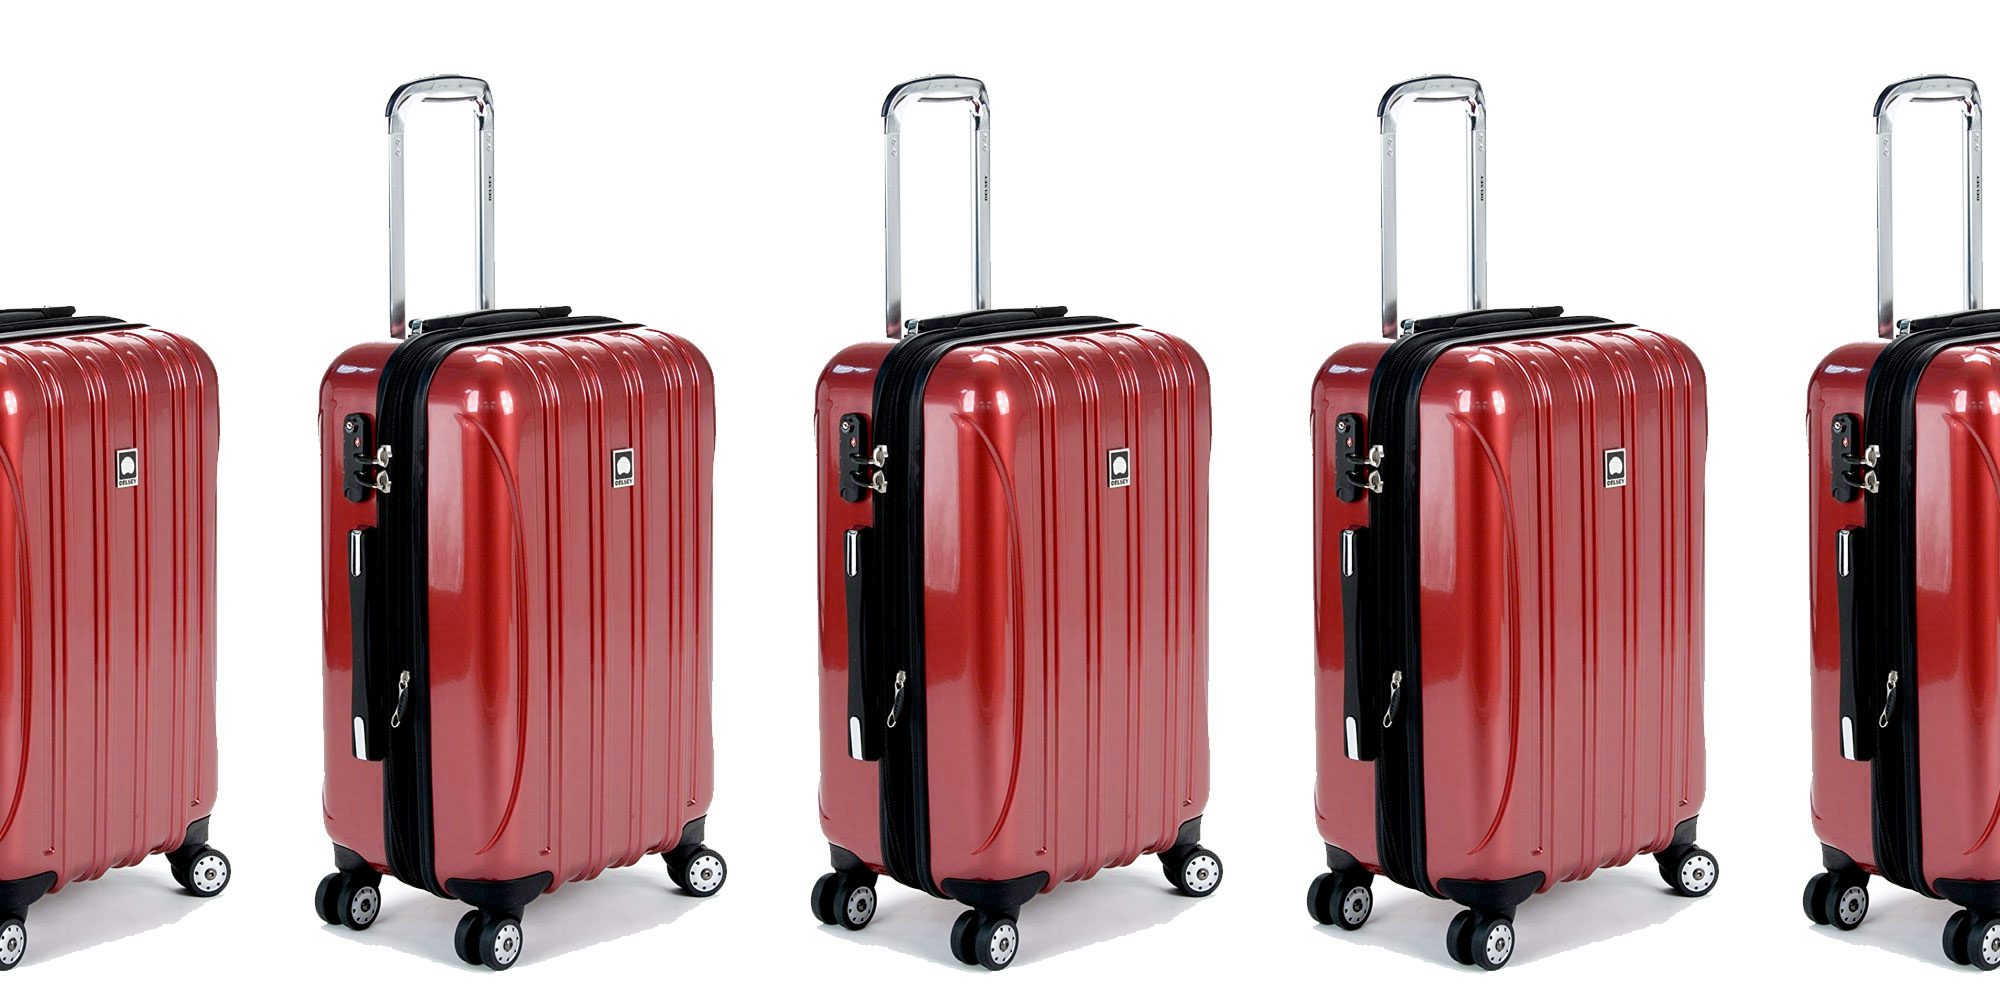 Travel smarter w/ highly-rated Delsey Paris luggage from $69 in today's ...